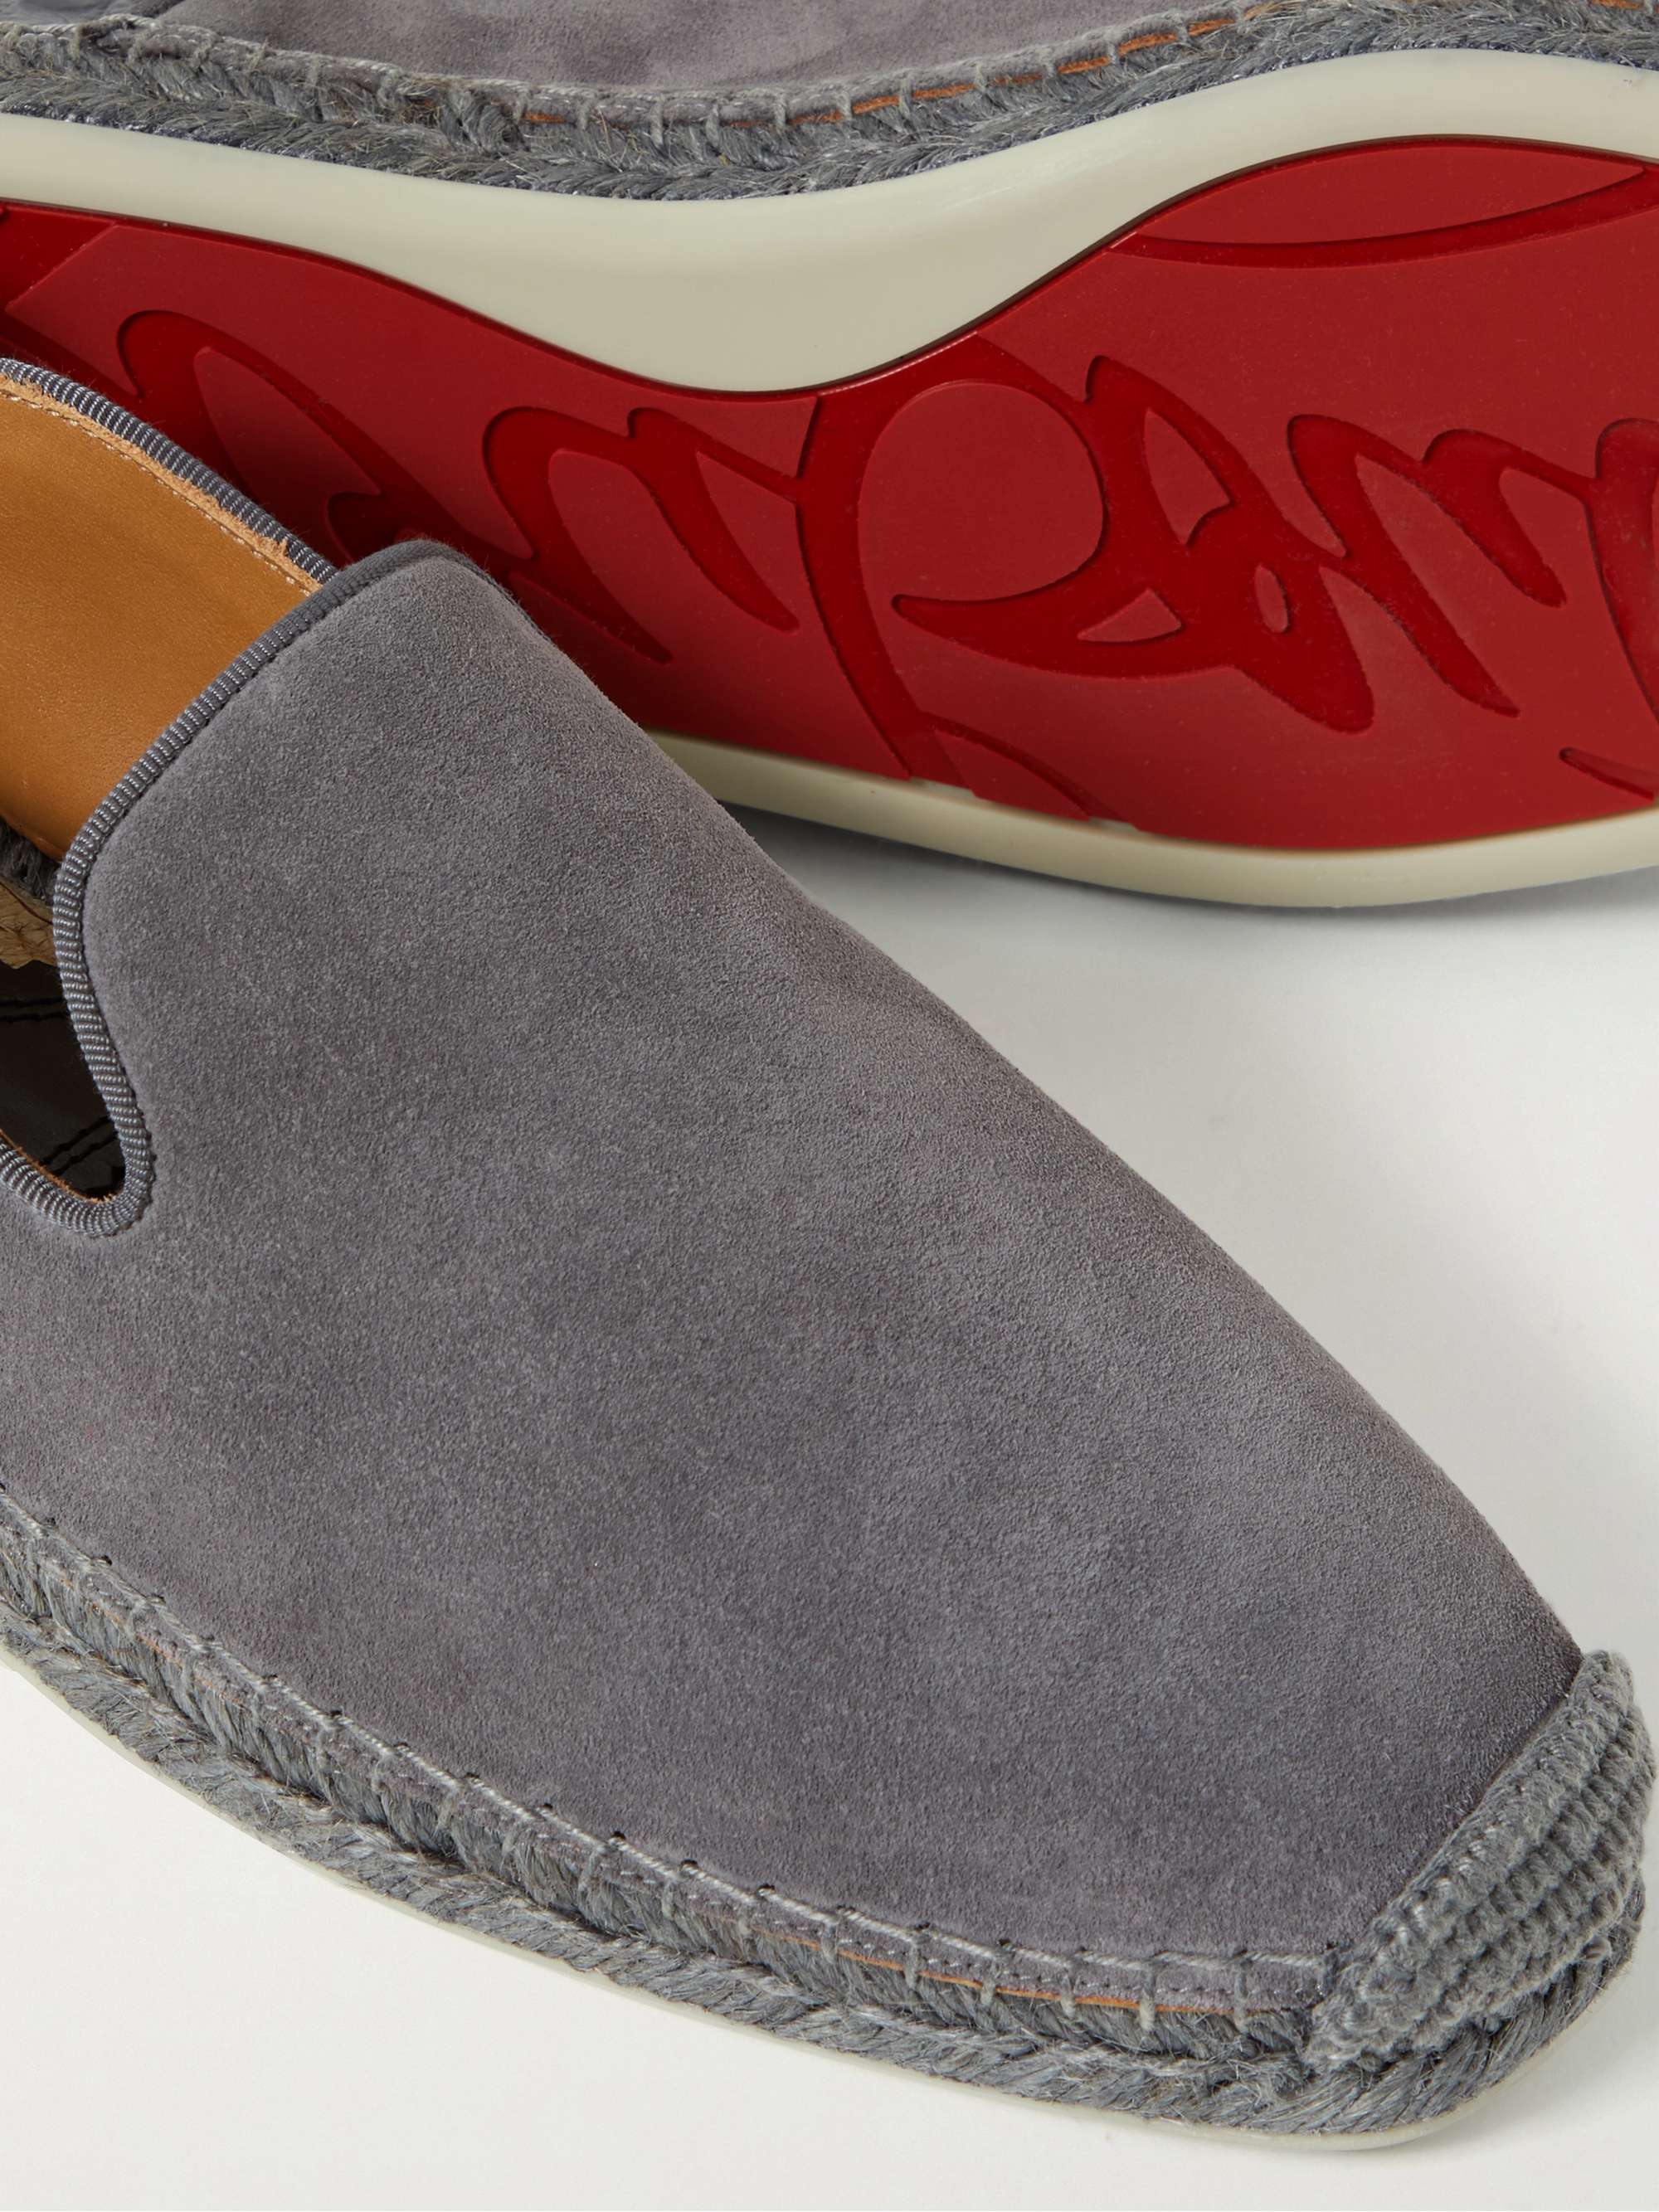 Mens Shoes Slip-on shoes Espadrille shoes and sandals Christian Louboutin Collapsible-heel Croc-effect Leather-trimmed Suede Espadrilles in Grey for Men 